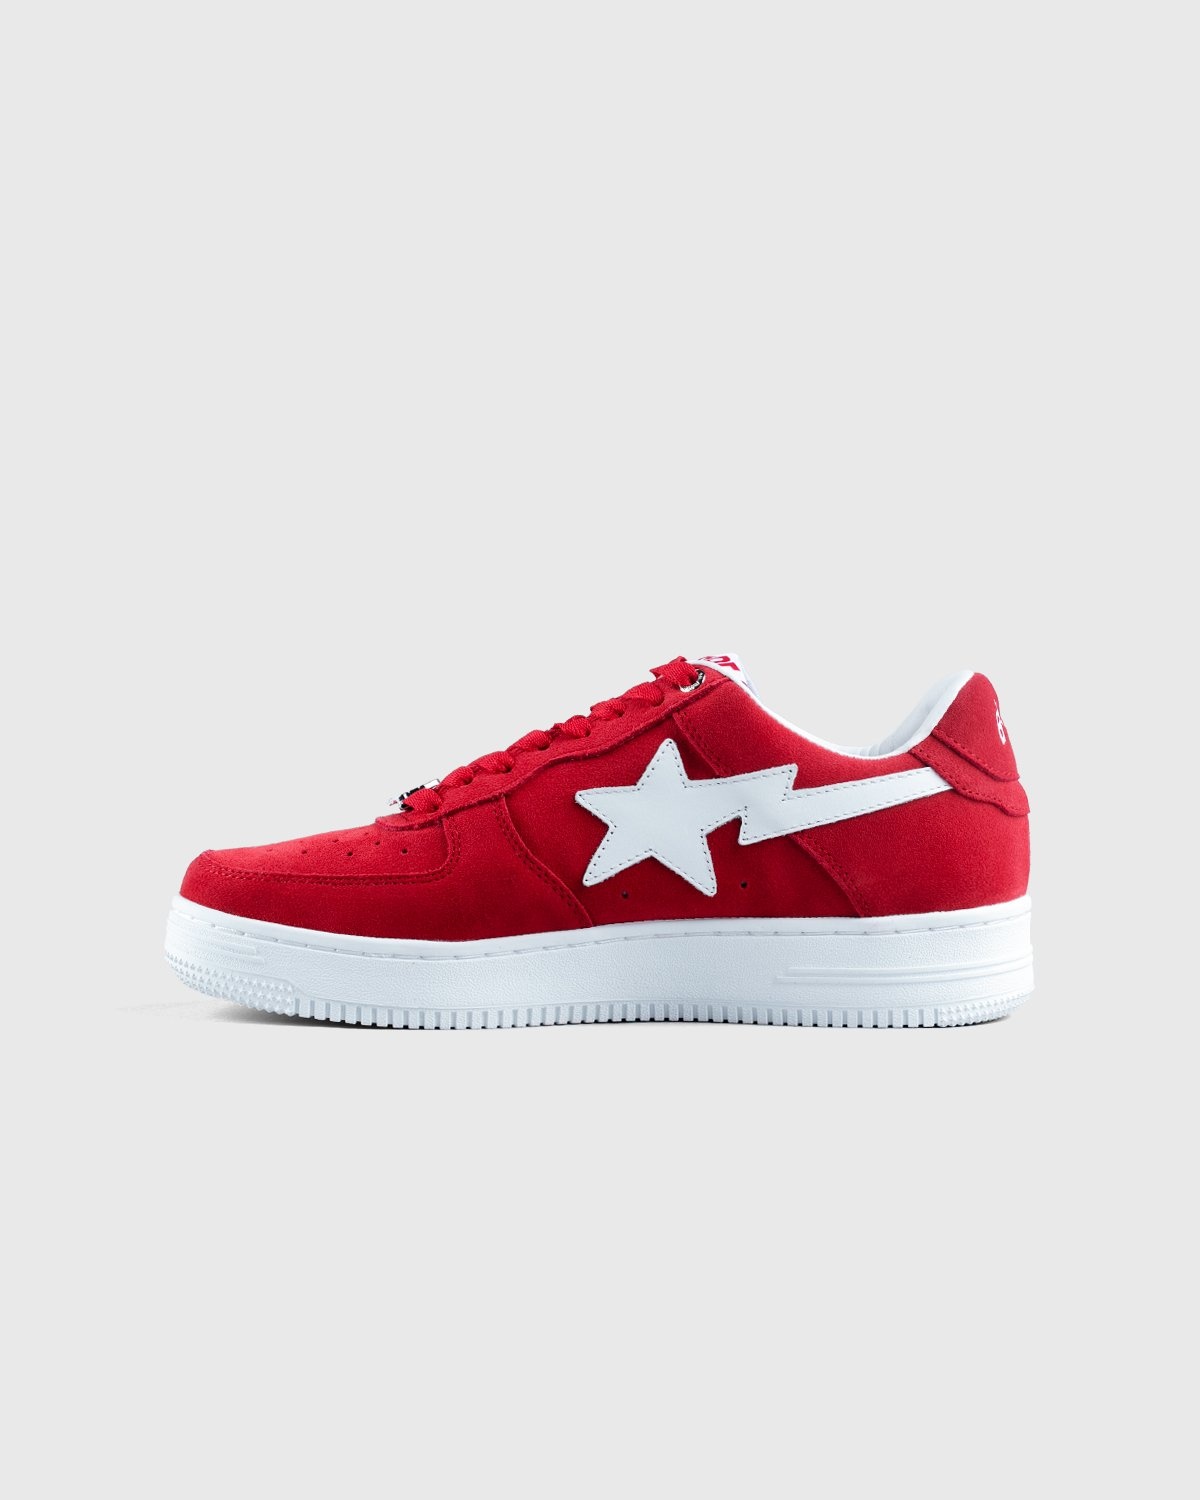 BAPE x Highsnobiety – BAPE STA Red - Low Top Sneakers - Red - Image 4